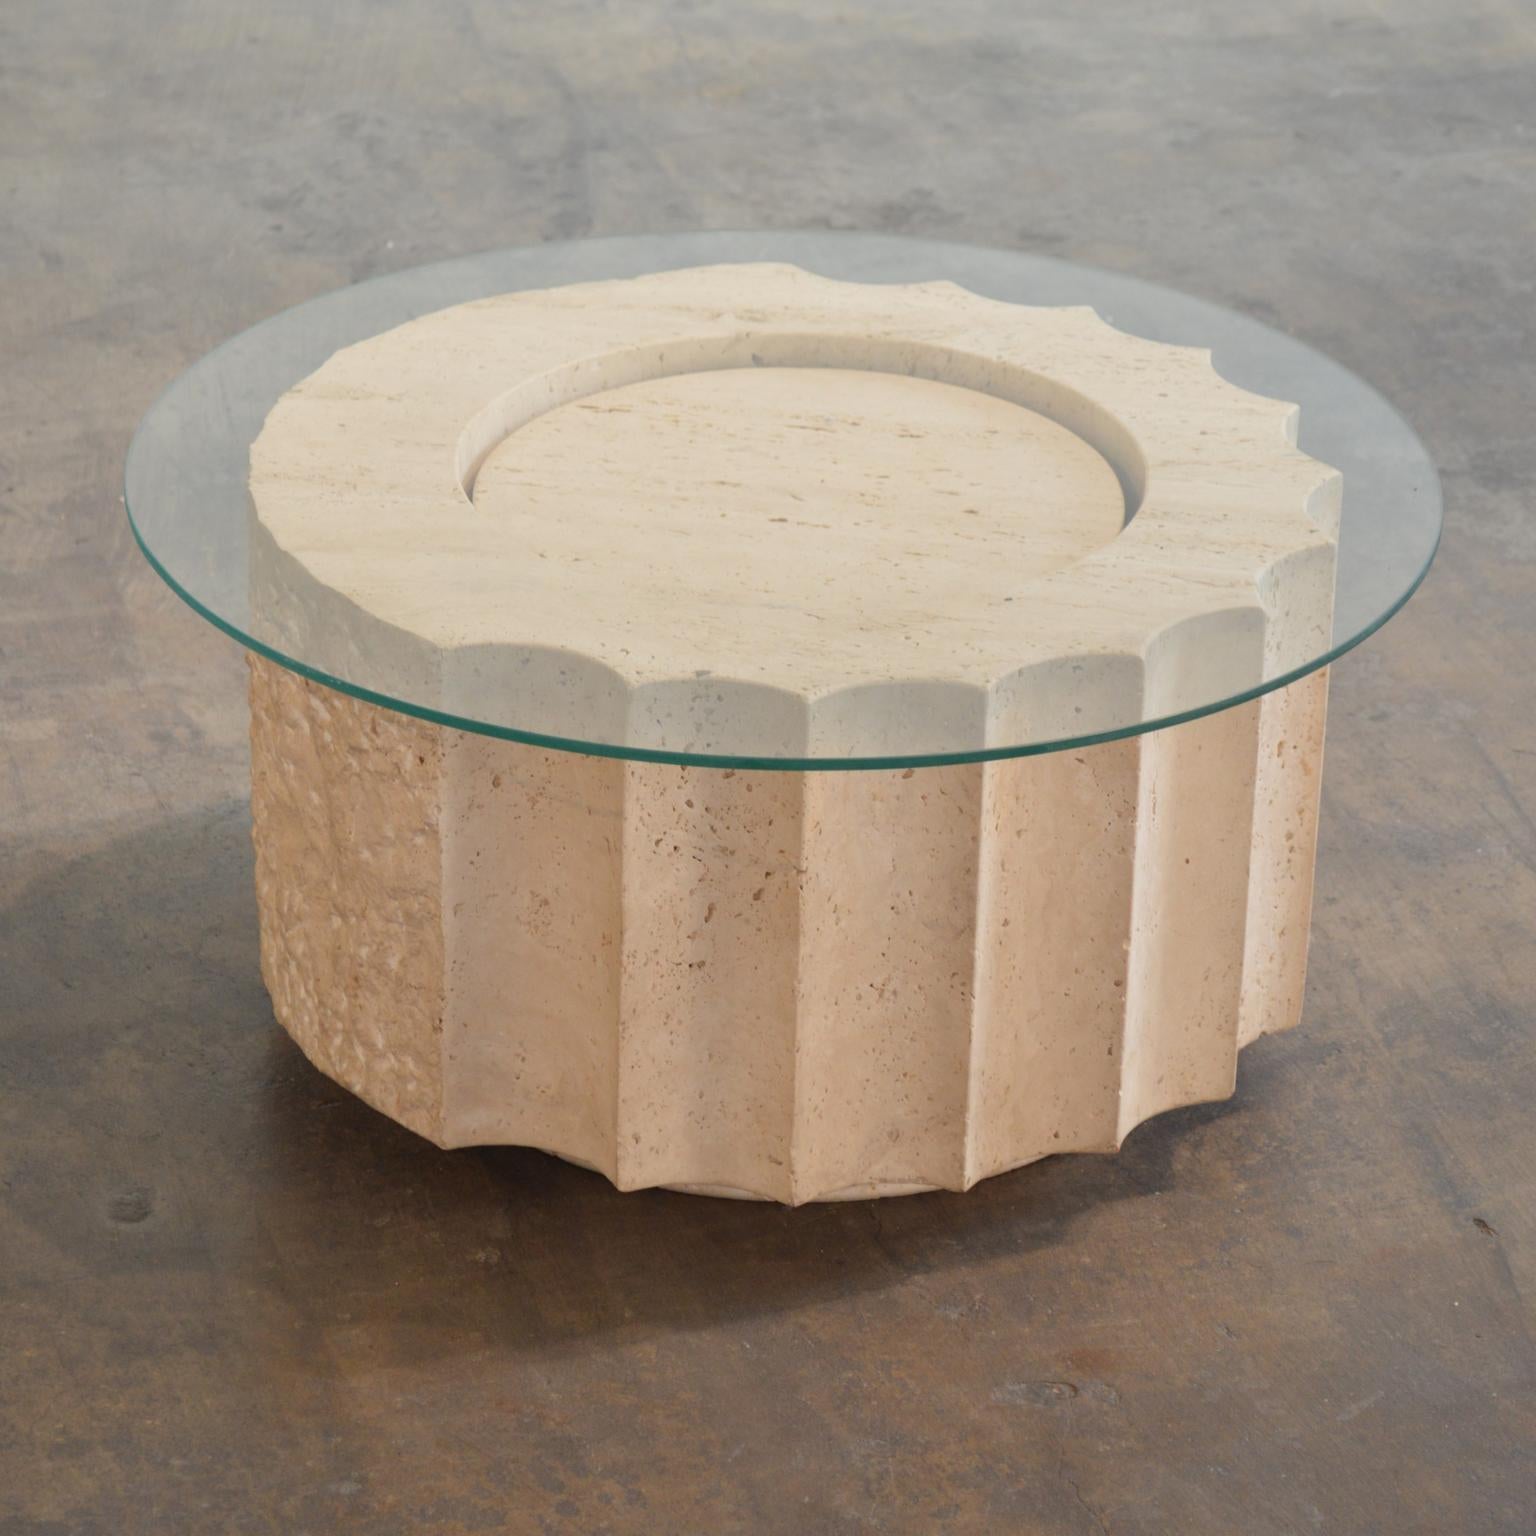 Post-Modern Travertine coffee table or low side table in the form of an unfinished section of Doric column; two thirds of the column are fluted, with the remainder rough-hewn. Purchased in the 1980s from a dealer of Italian design and attributed to